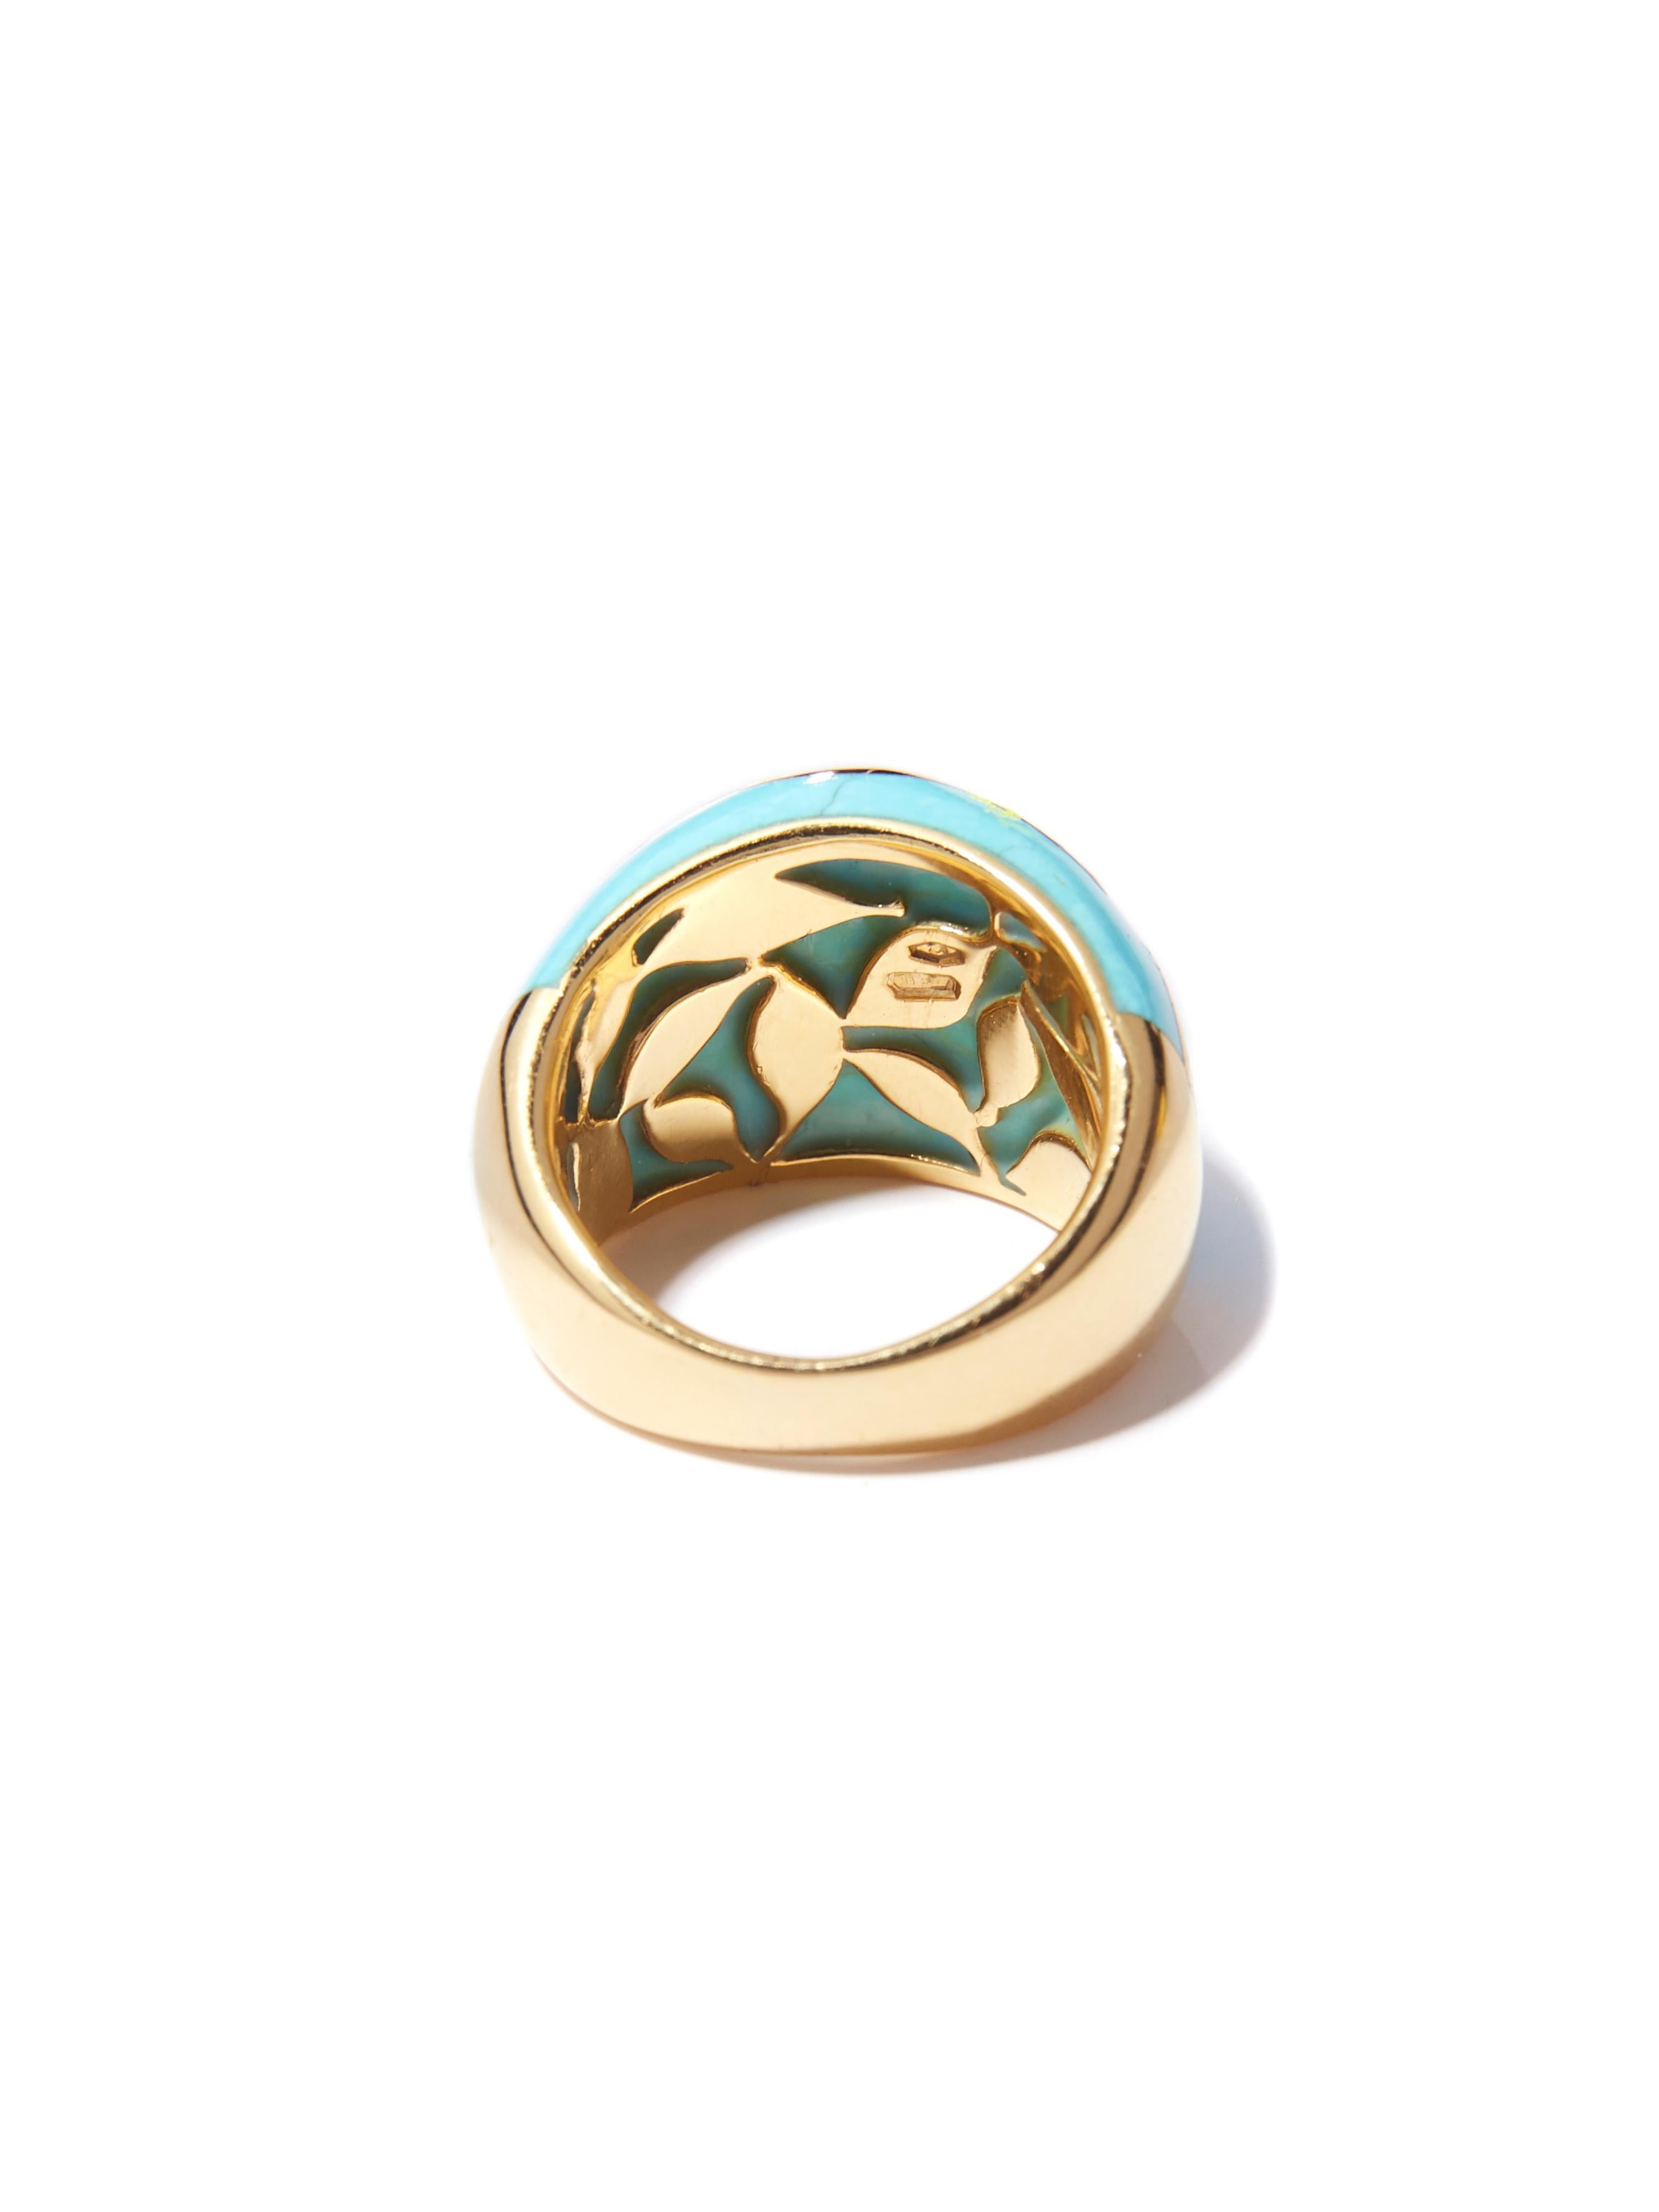 inlaid turquoise ring